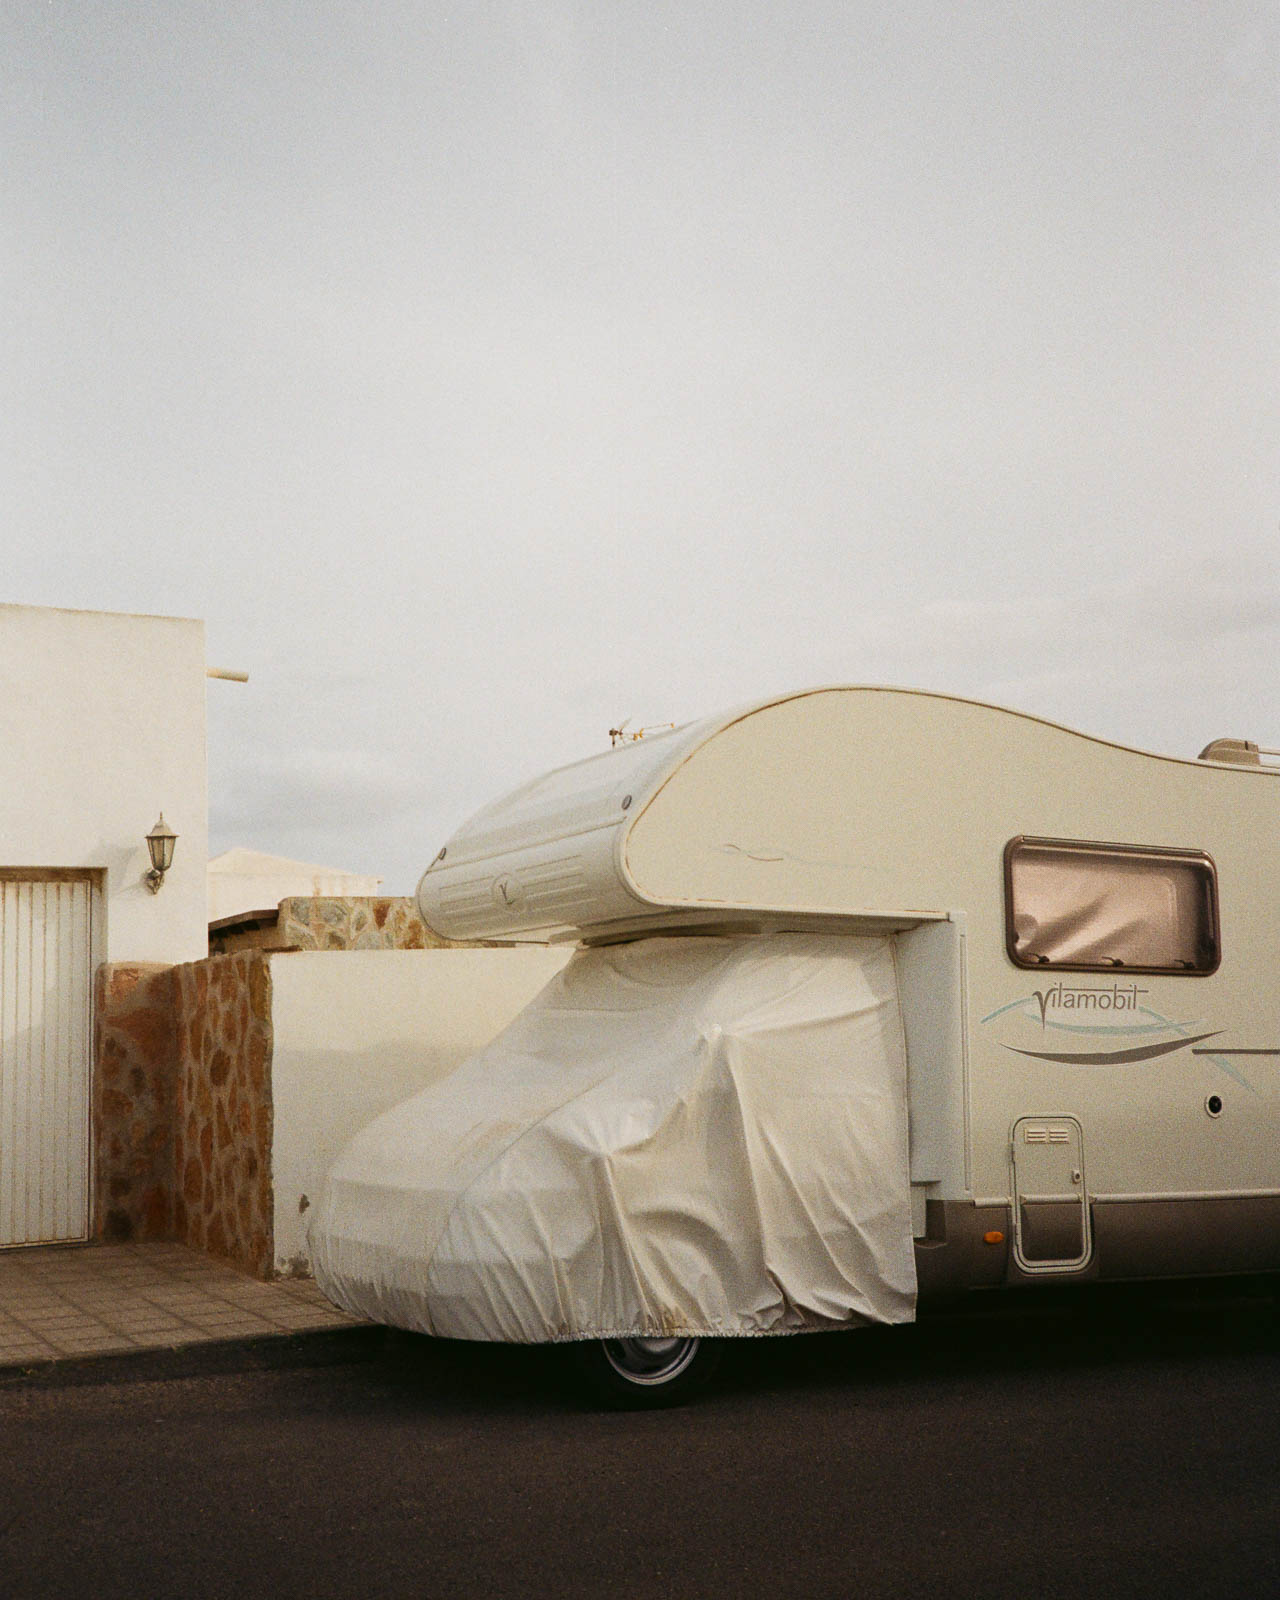 analog diary 2020 by storm wes shot with yasica t4 on Kodak gold film in Lanzarote